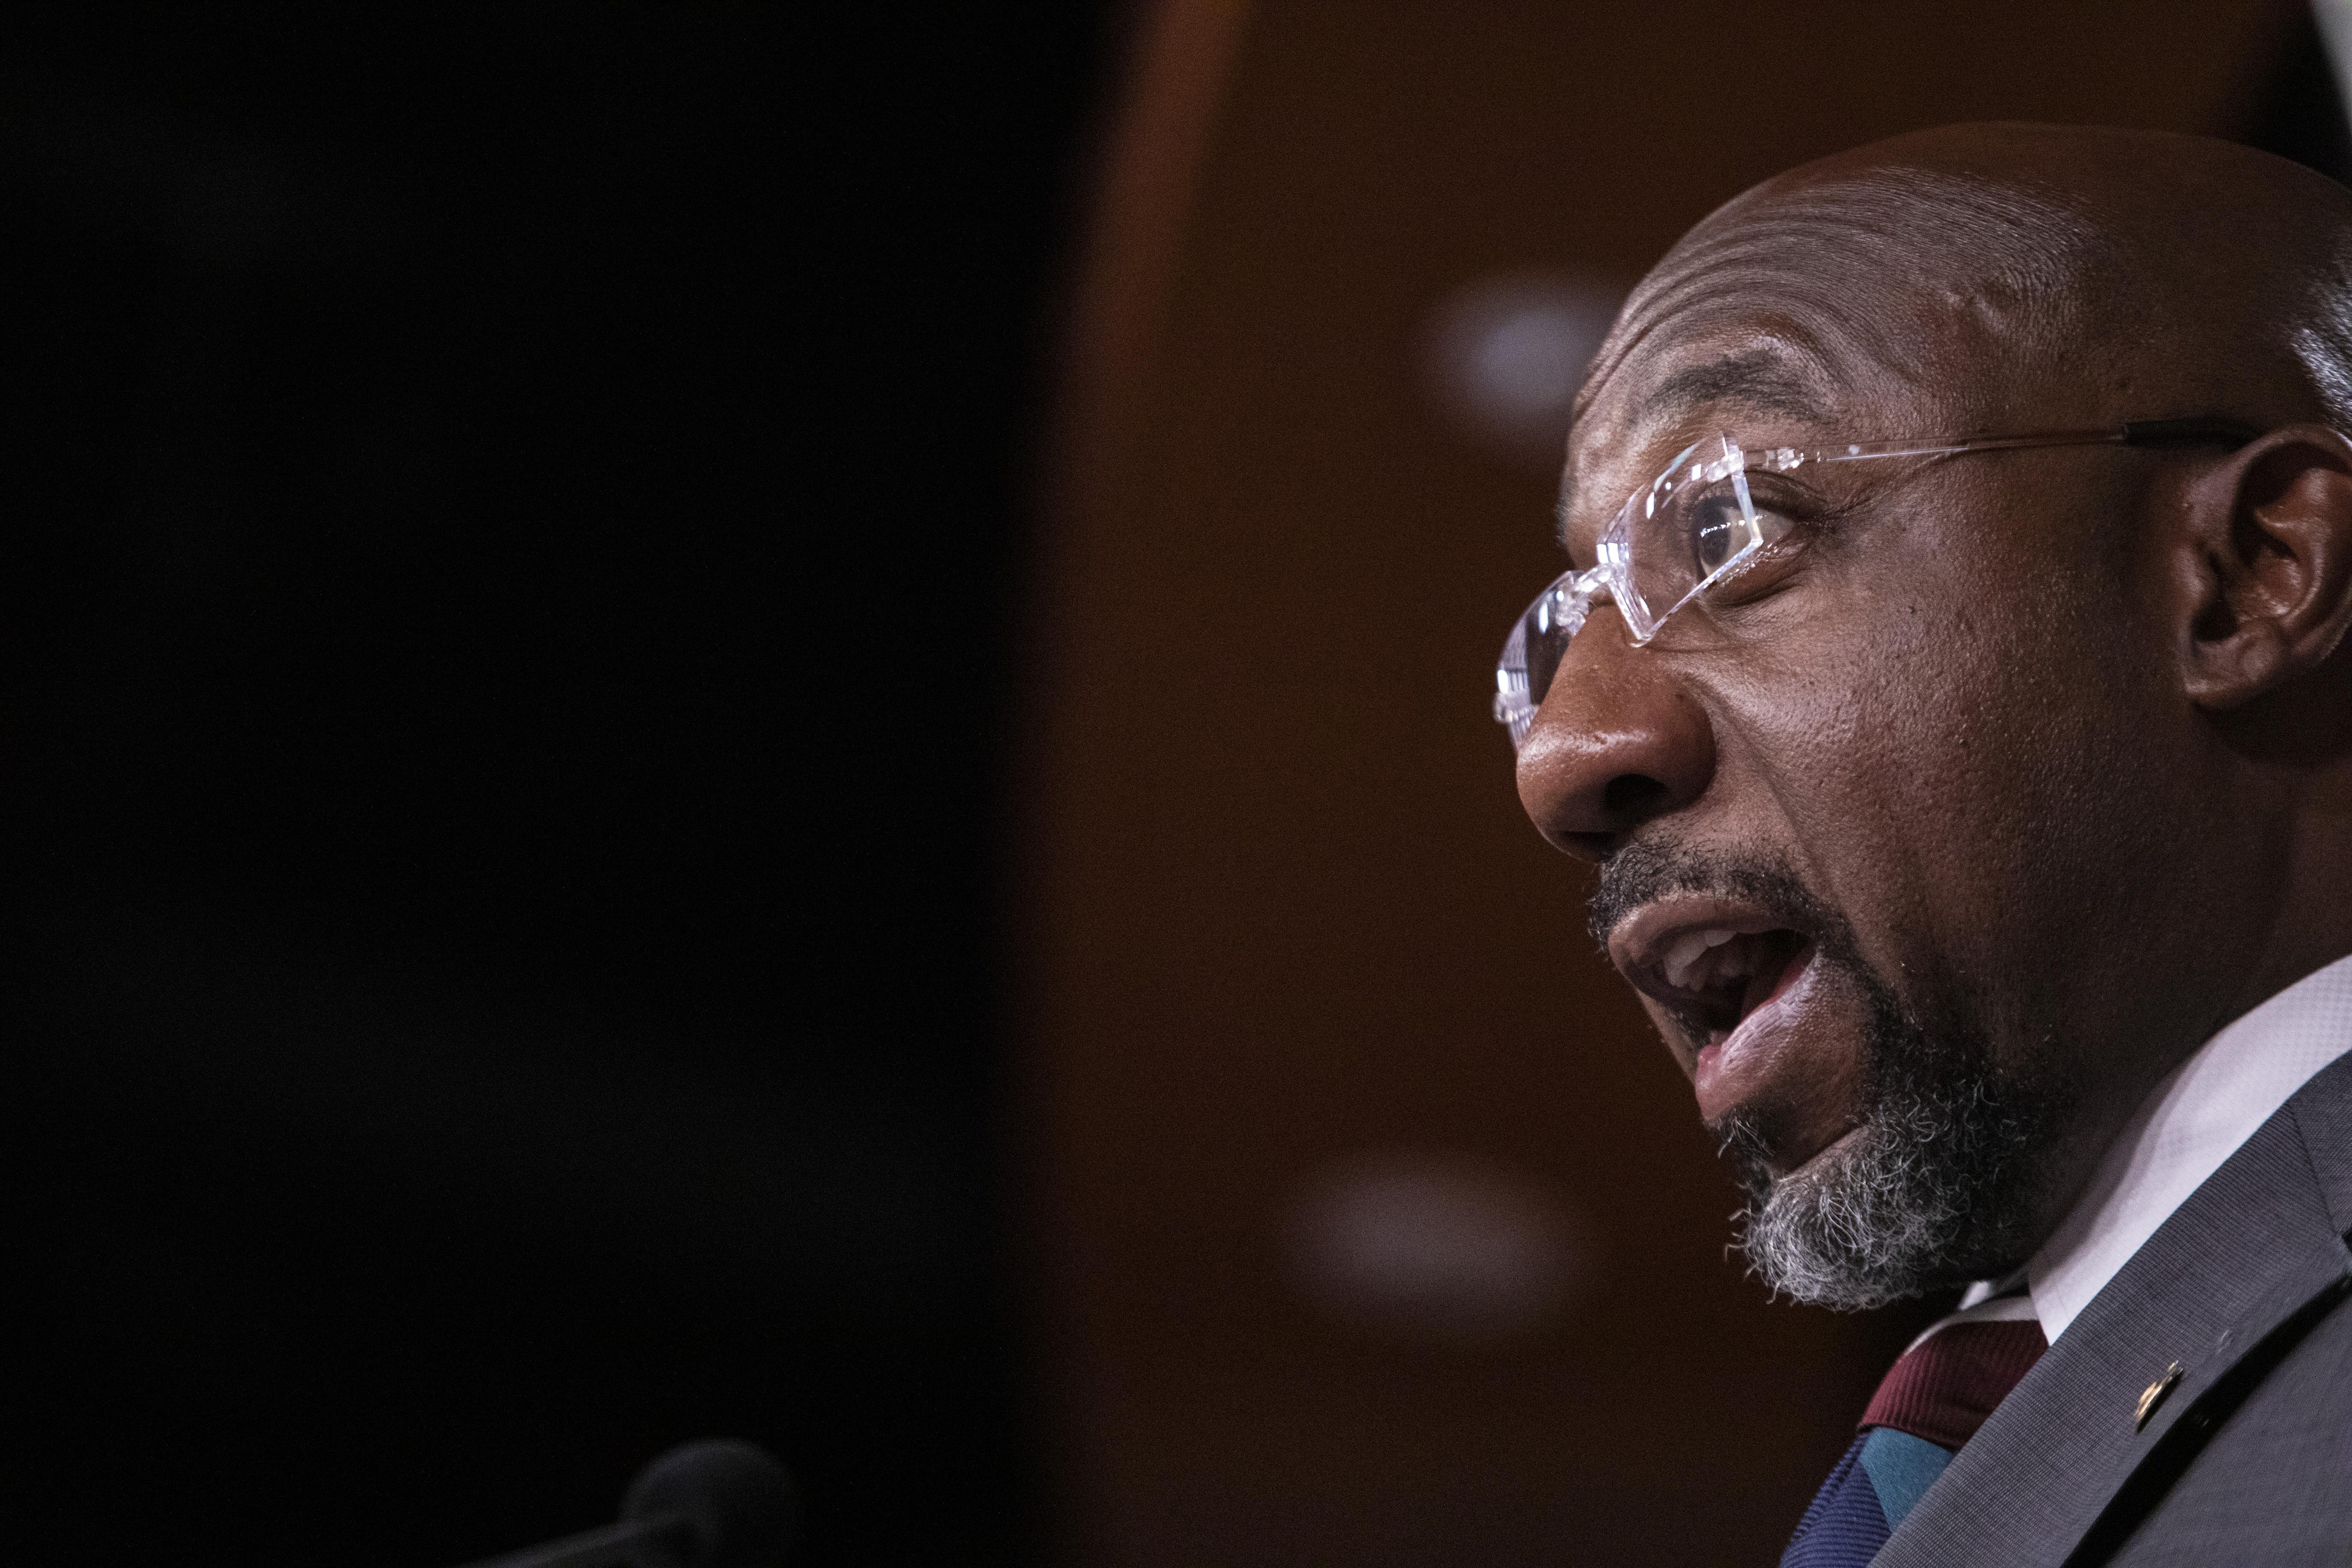 WASHINGTON, DC - JULY 26: Sen. Raphael Warnock (D-GA) speaks to reporters during a press conference following the weekly Democratic Party luncheon on July 26, 2022 at the U.S. Capitol in Washington, DC. The Democratic leadership addressed issues including the CHIPS+ legislation and cannabis legalization. (Photo by Anna Rose Layden/Getty Images)